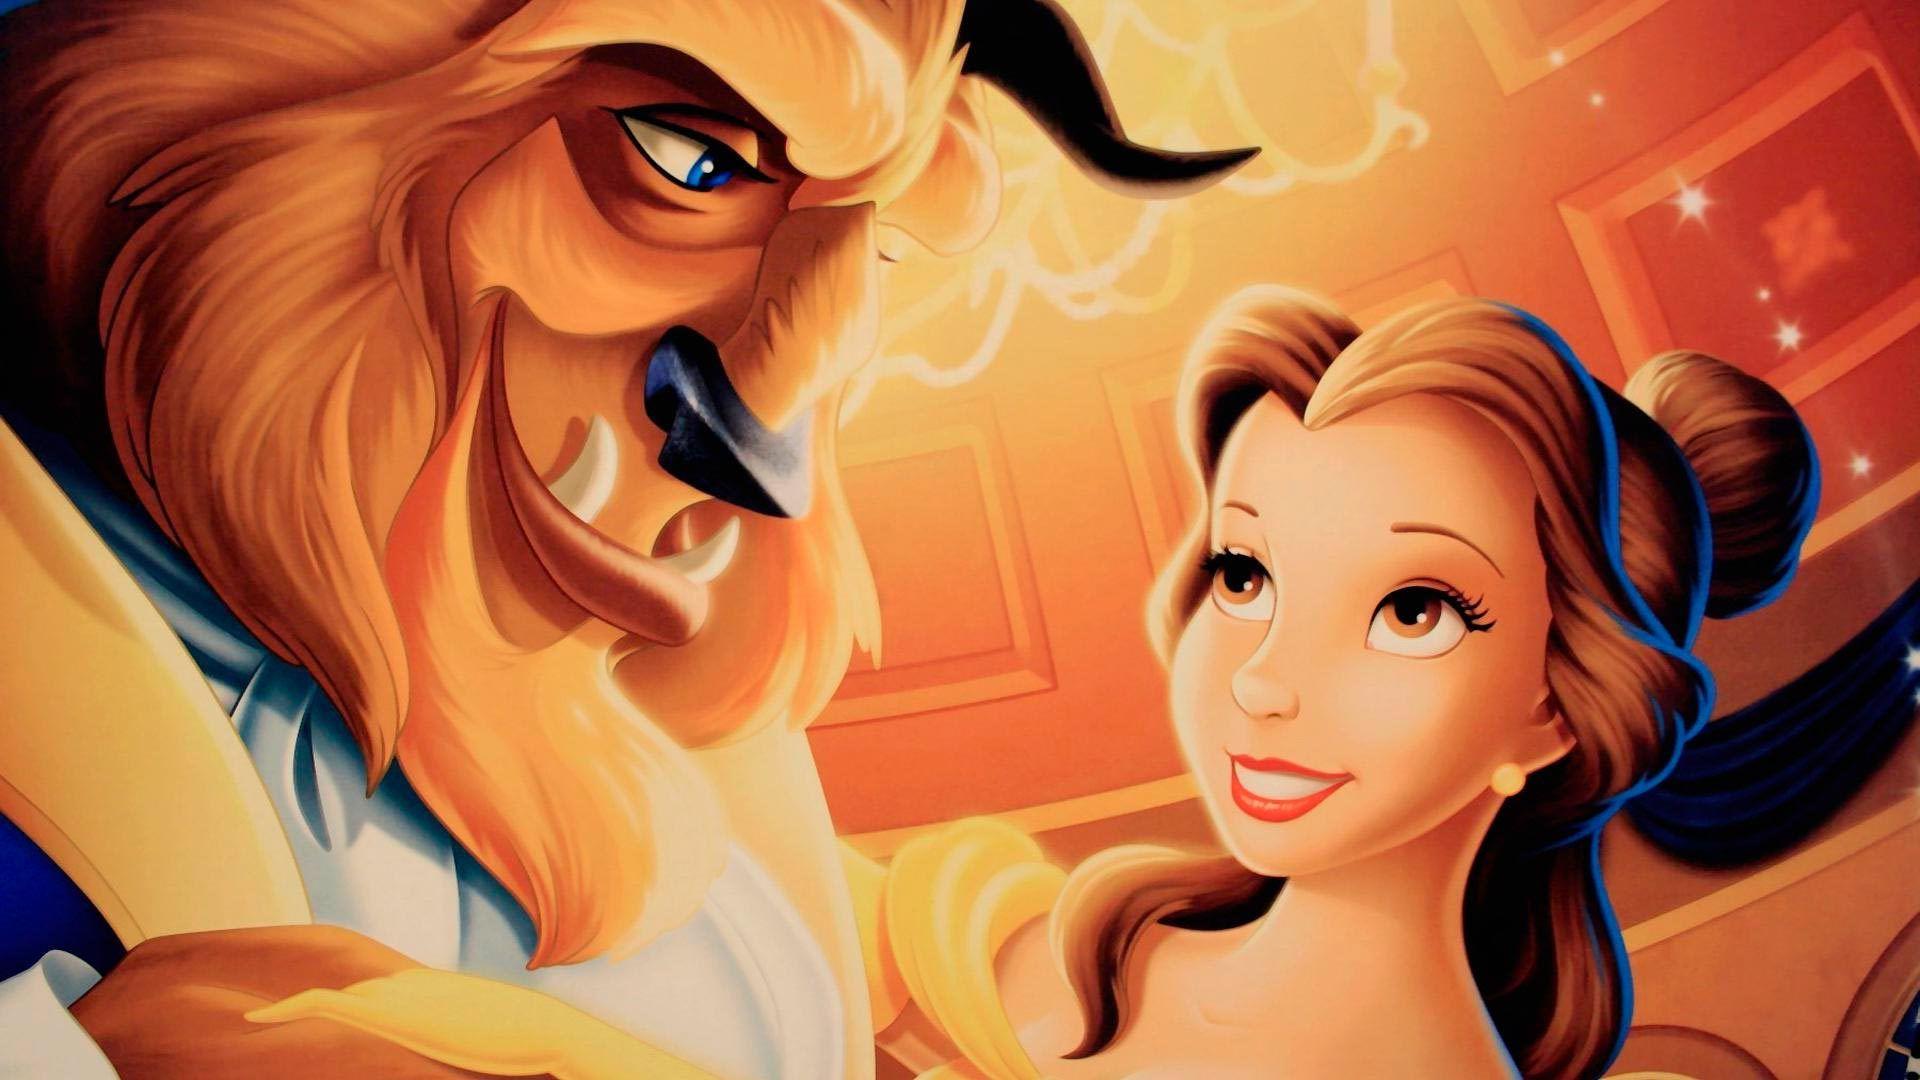 Beauty and the Beast wallpaper and image, picture